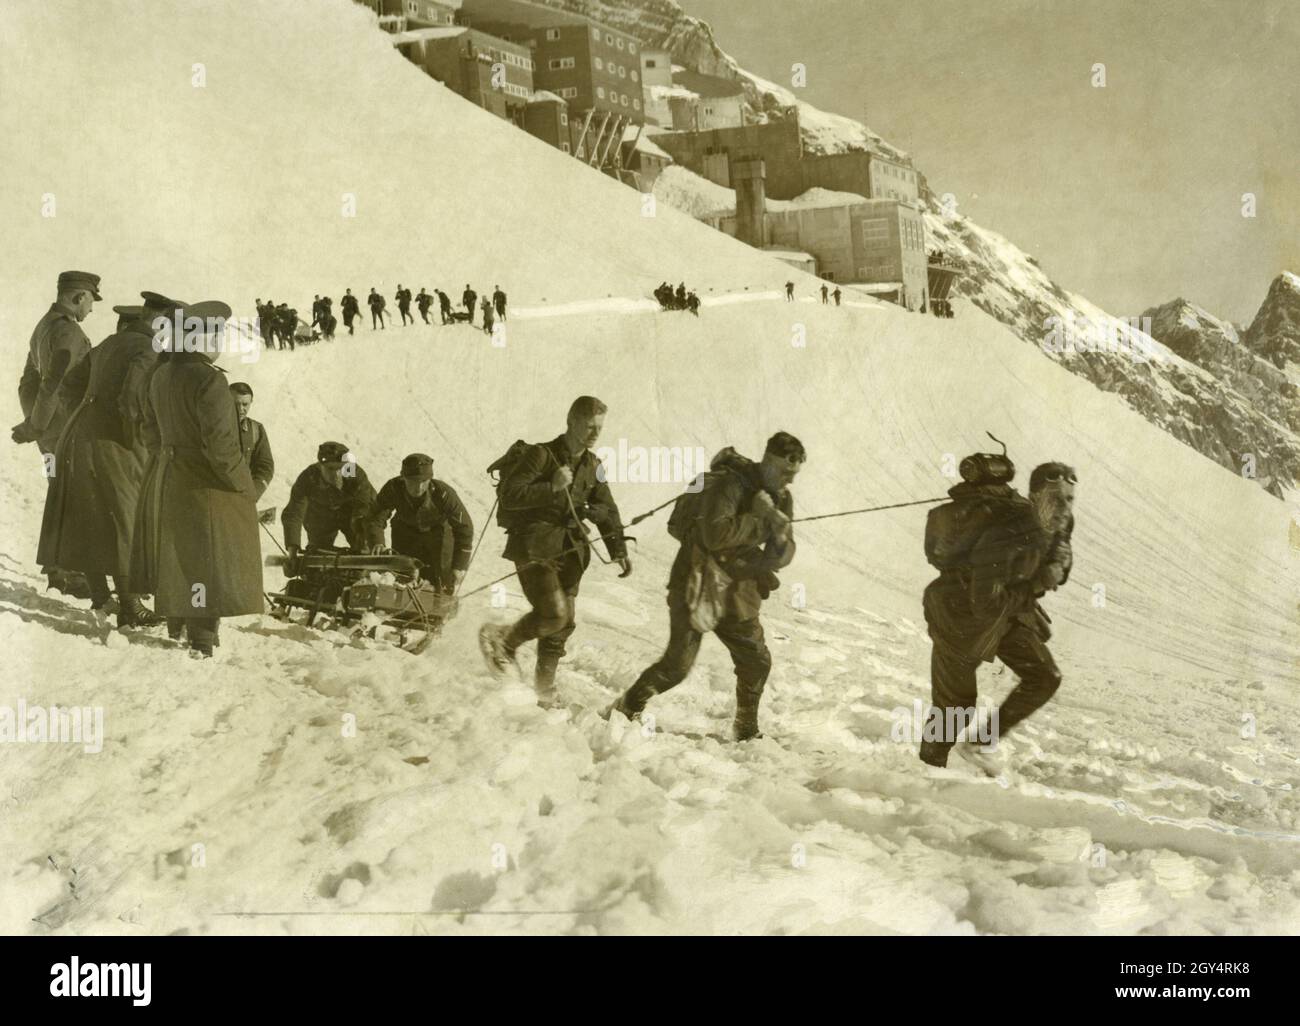 In 1934, exercises of the mountain troops took place on the Zugspitzplatt. In the picture, a column has set off from the Schneefernerhaus below the Zugspitz peak and is now marching past its officers up the snowy slopes. Several soldiers at a time are pulling and pushing one of the sledges, which carry the necessary equipment such as skis. The soldiers are wearing snowshoes. [automated translation] Stock Photo